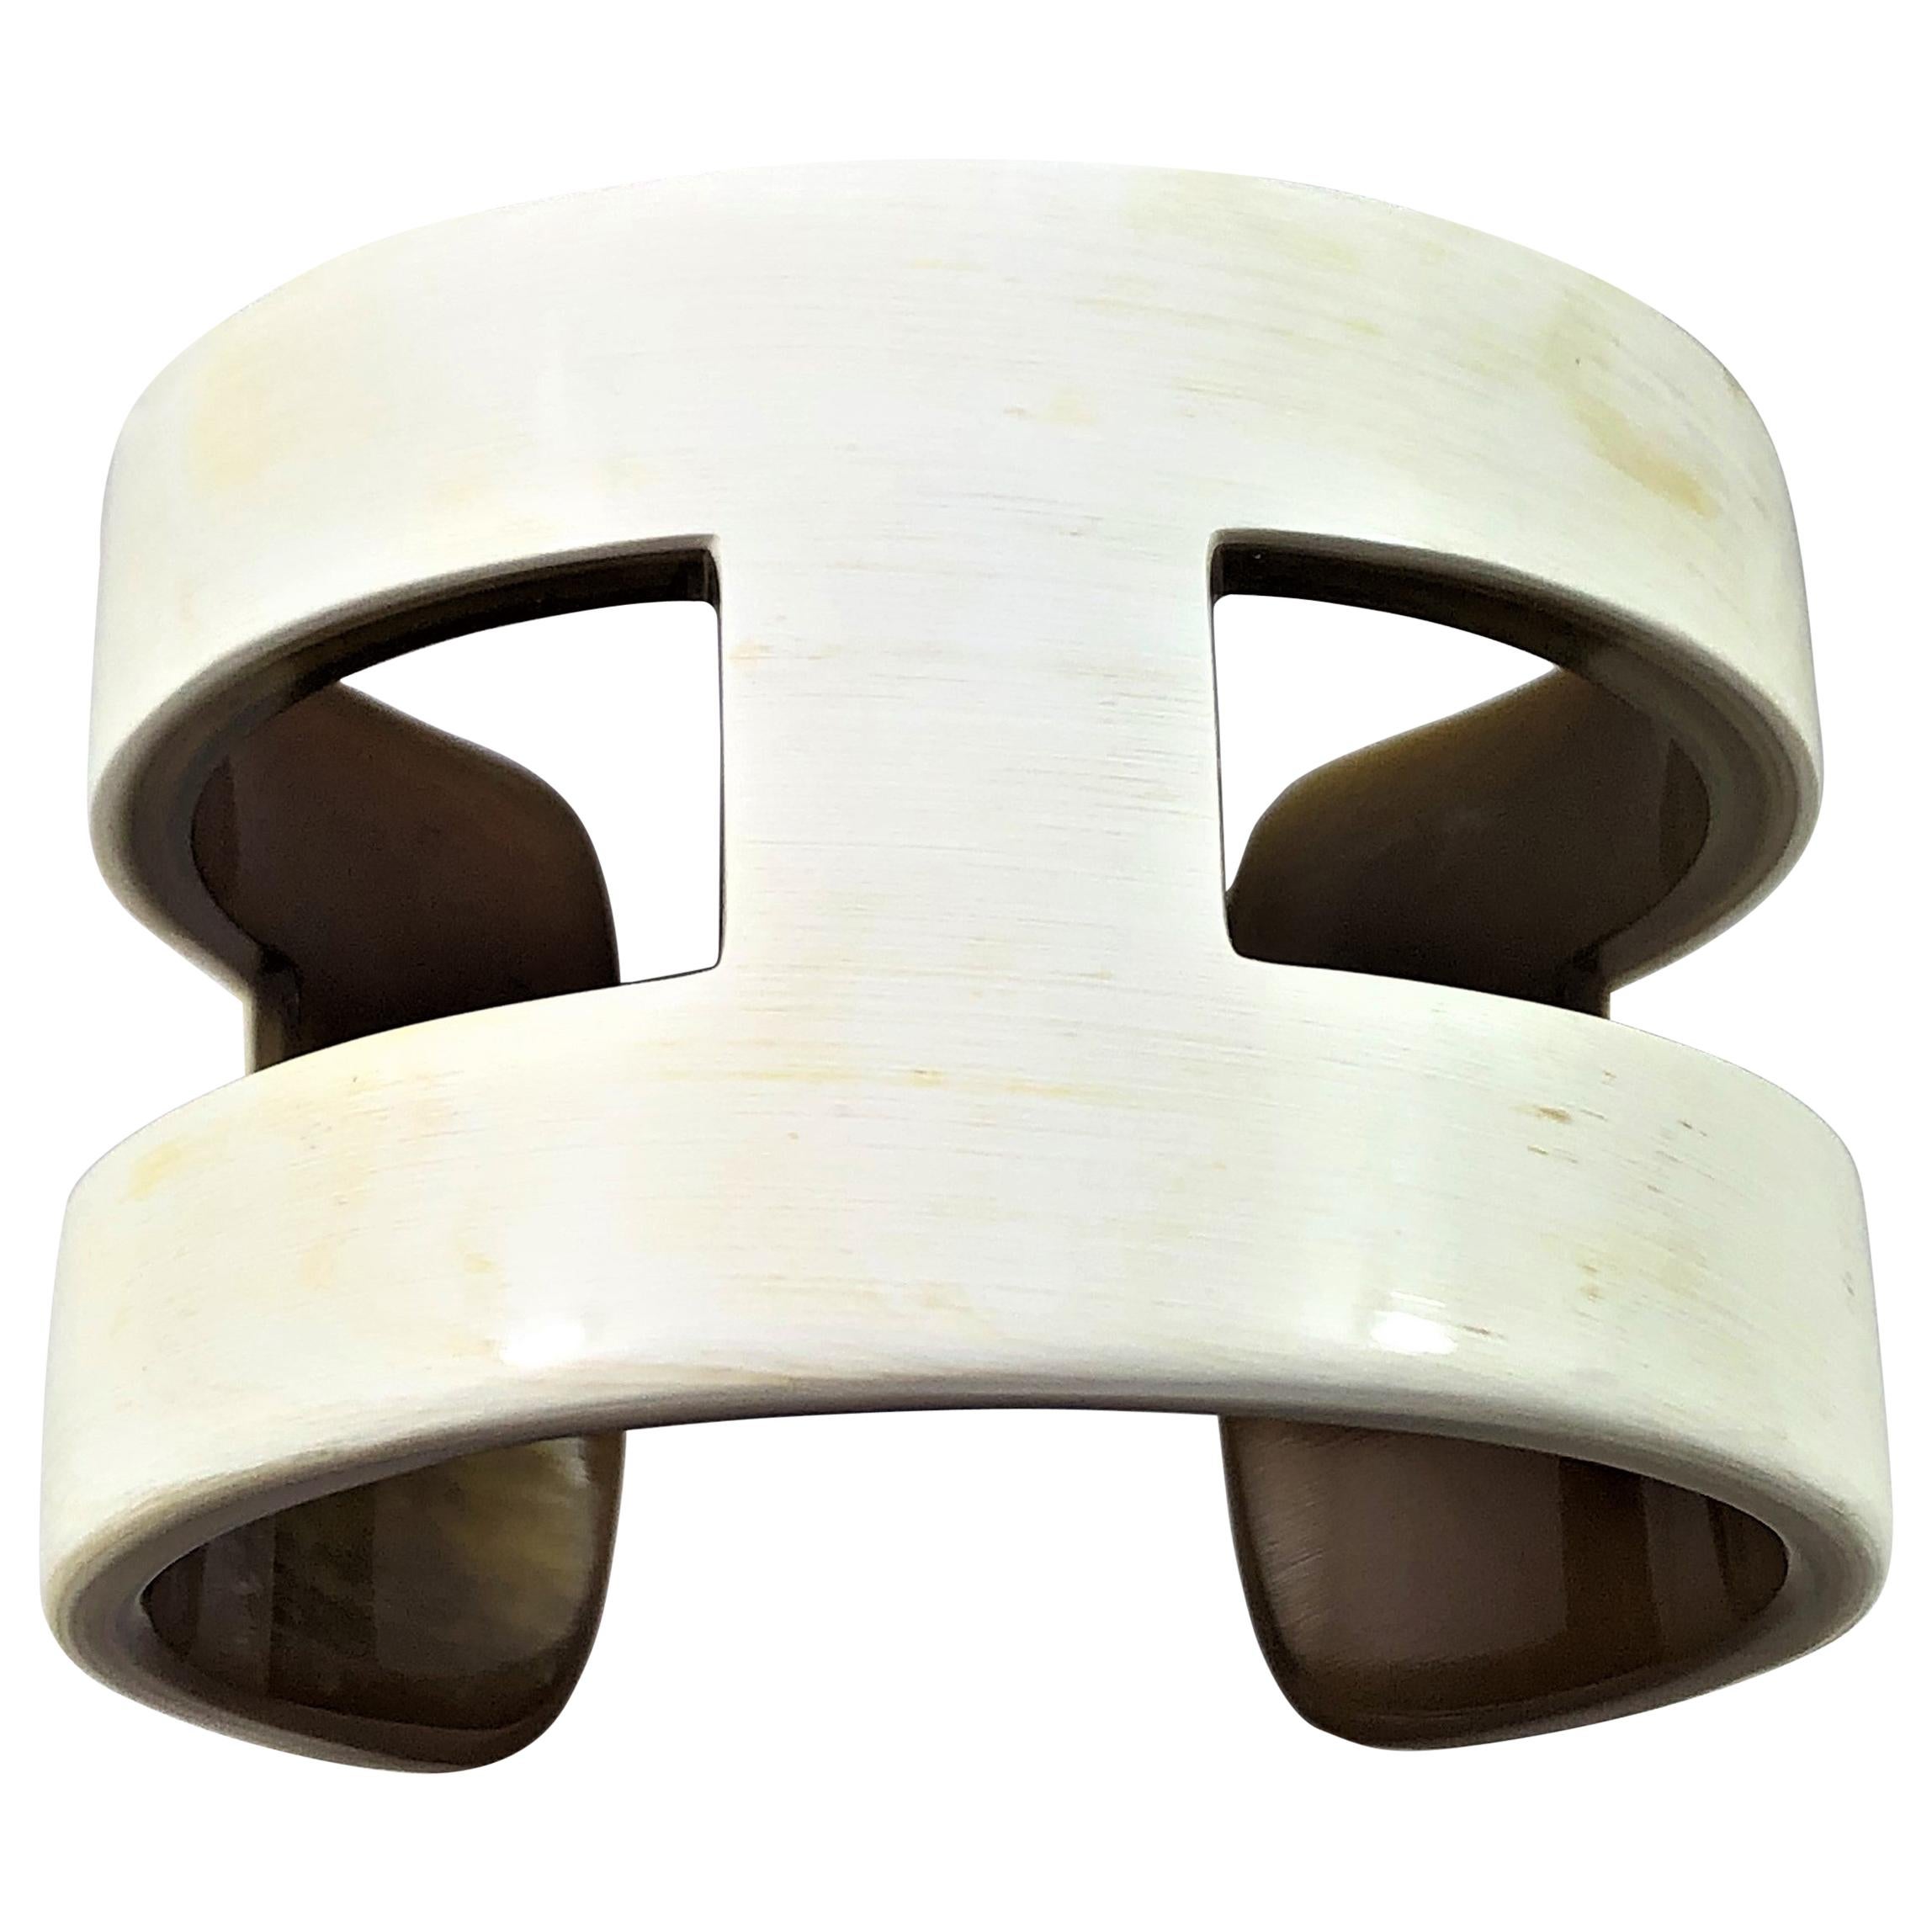 Creamy White "H" Style Horn Cuff or Bangle